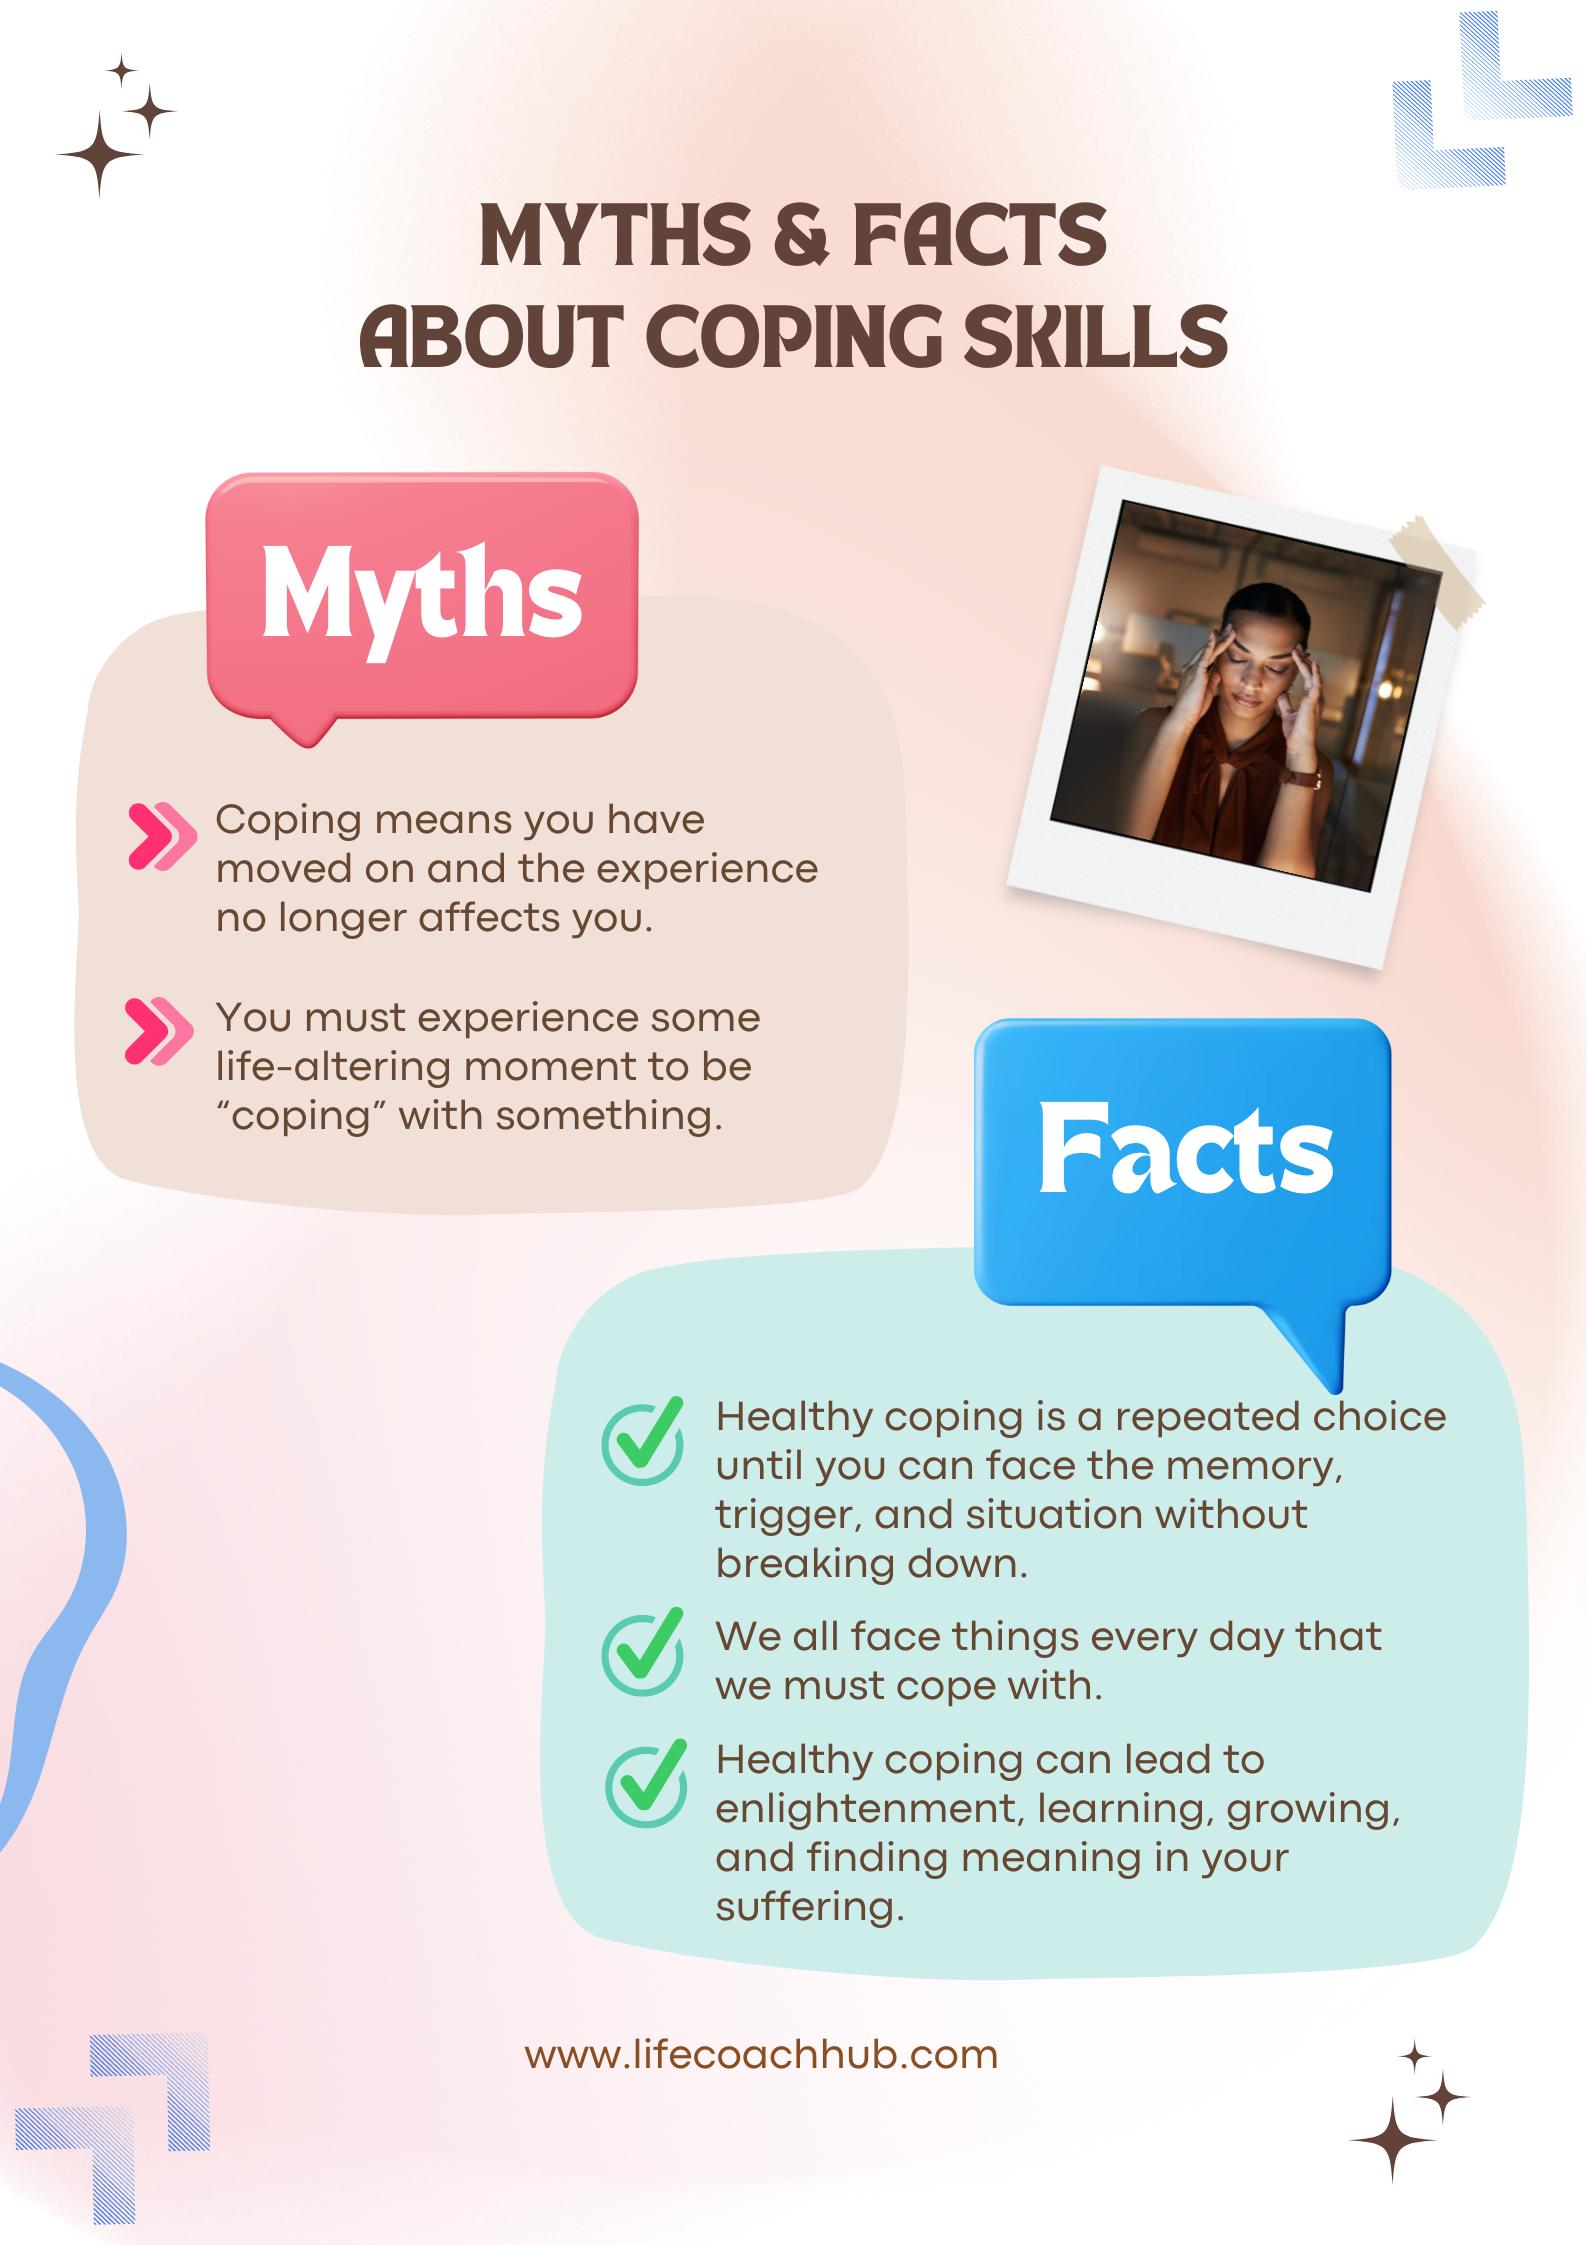 Myths & Facts about coping skills